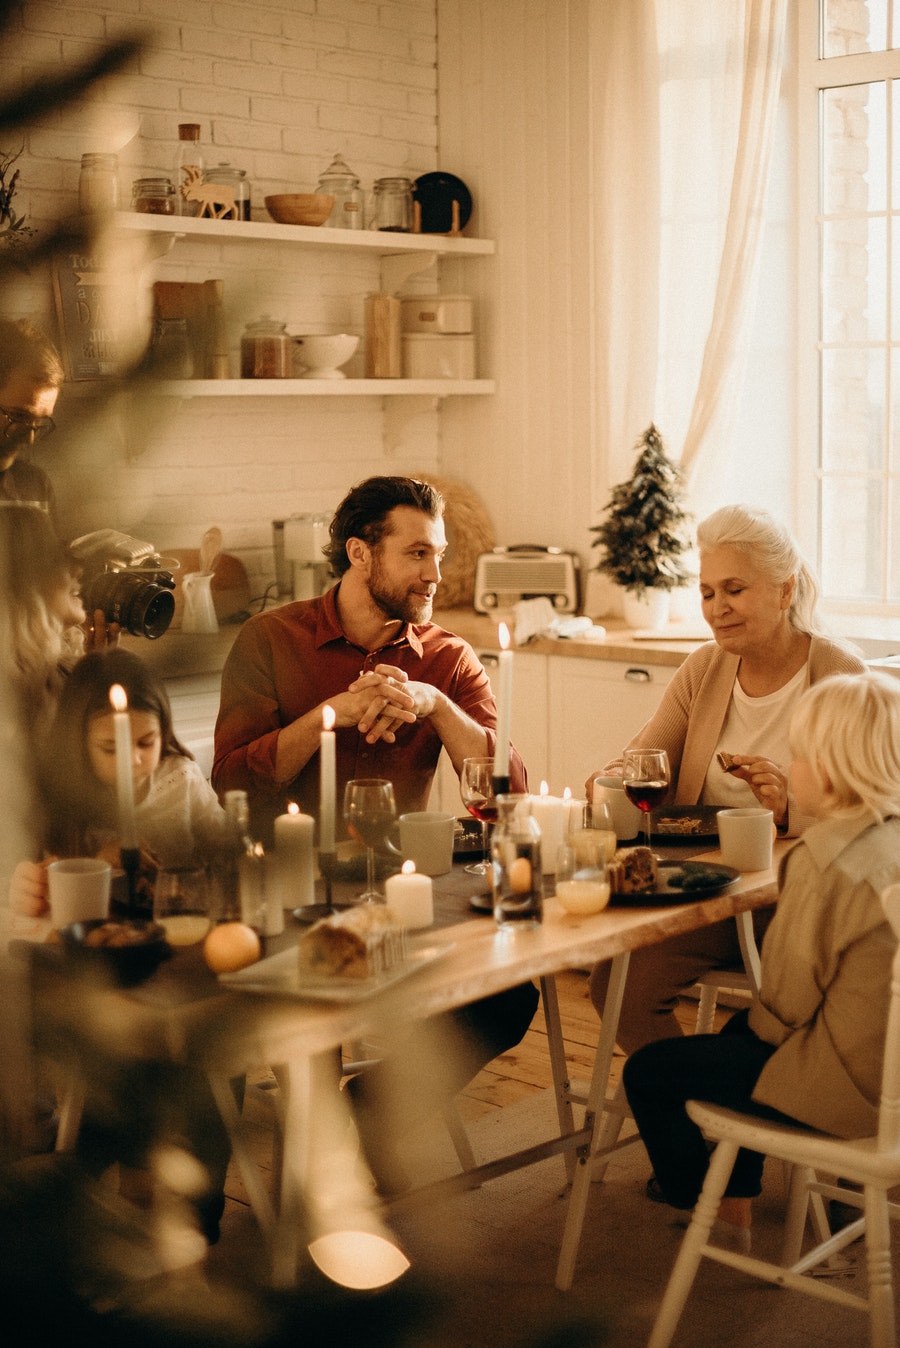 Celebrations for the Holidays and family get-togethers can end up badly unless you take certain precautions ahead of time.